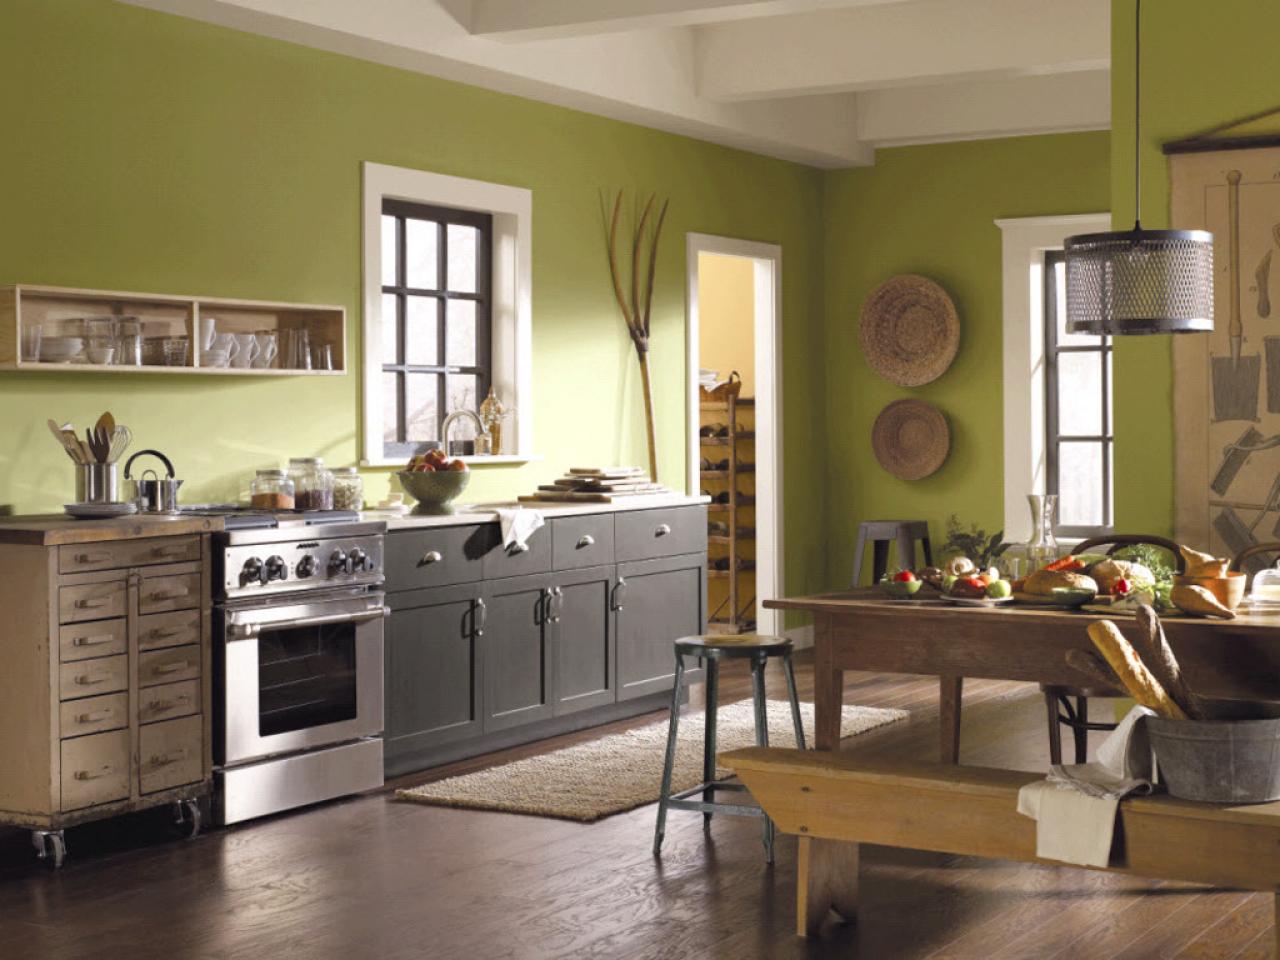 Green Kitchen Paint Colors: Pictures & Ideas From HGTV